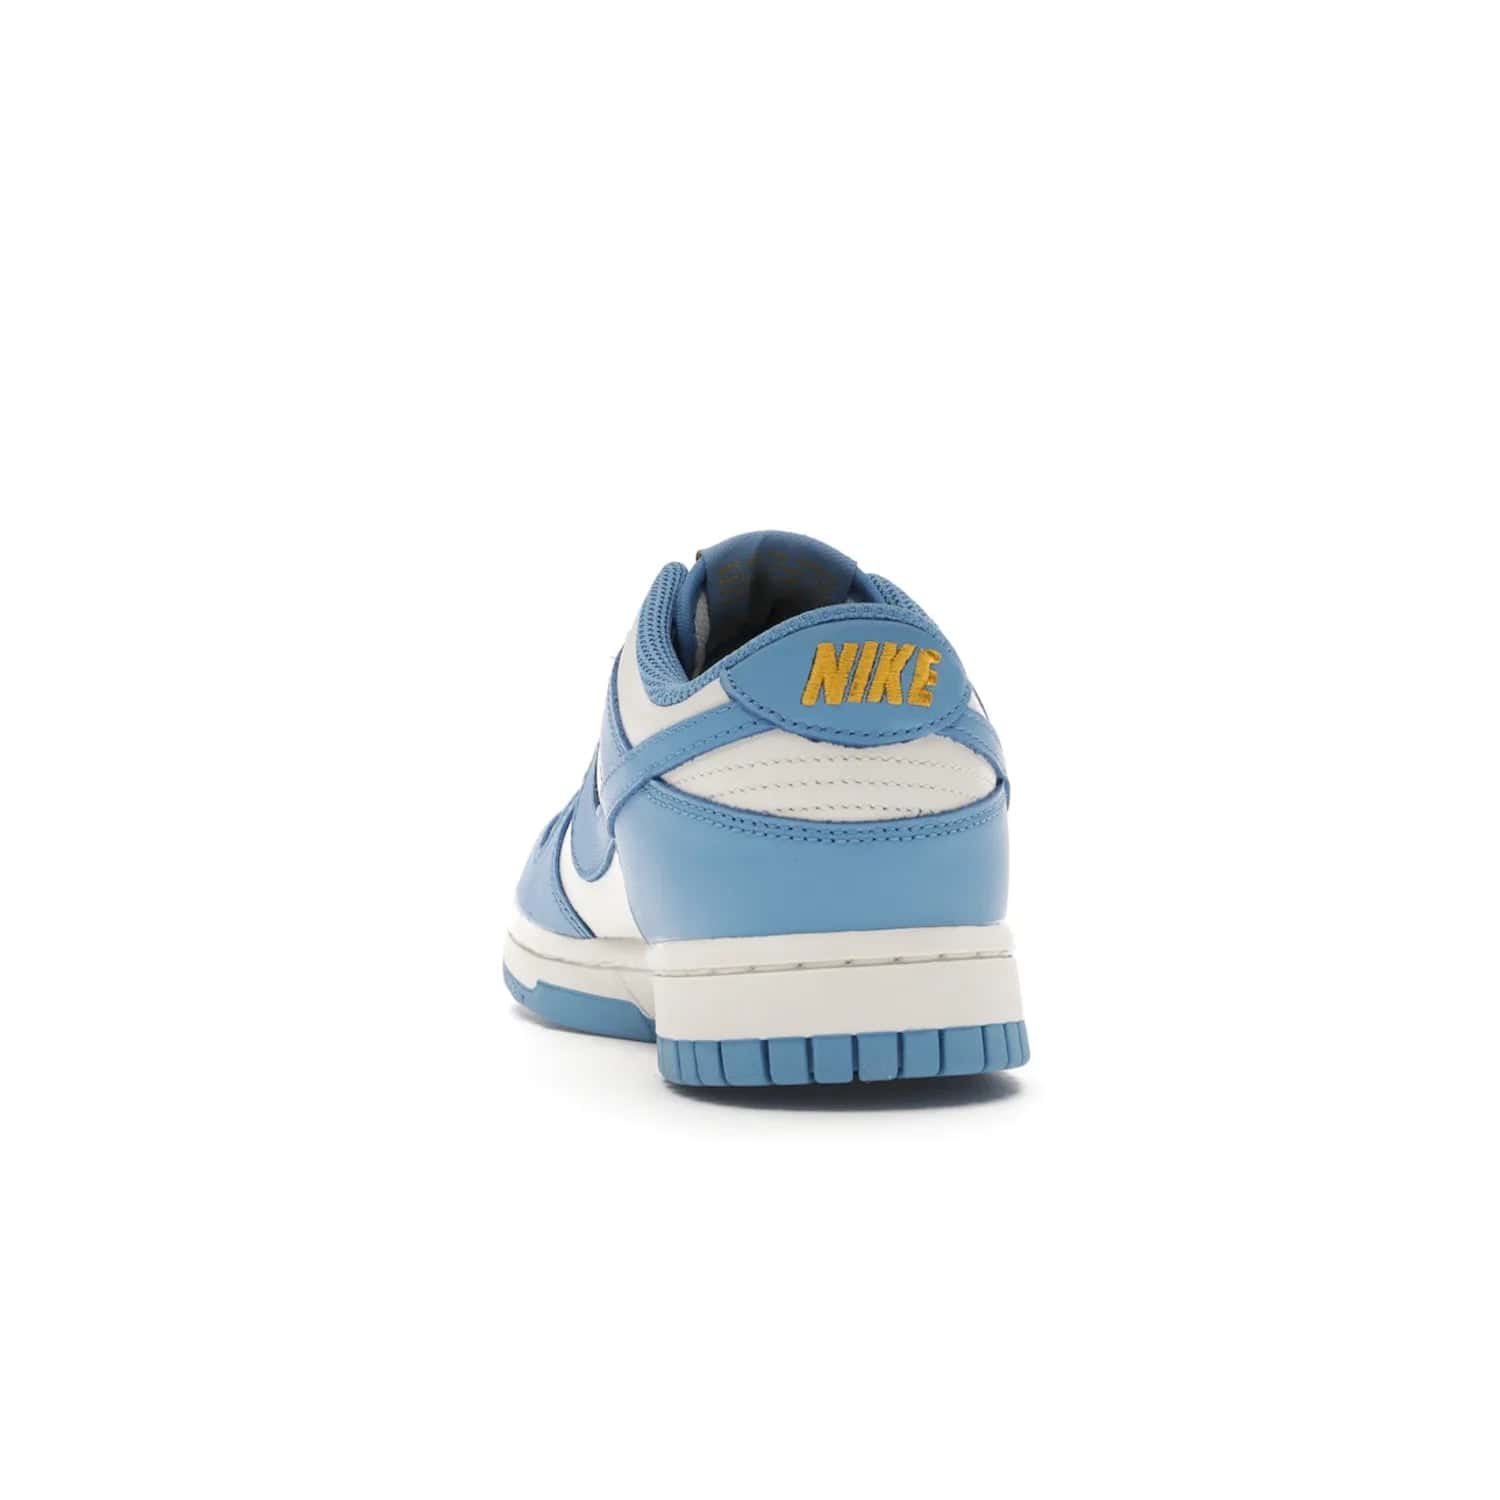 Nike Dunk Low Coast (Women's) - Image 27 - Only at www.BallersClubKickz.com - Iconic UCLA colors honor the west coast with the Nike Dunk Low Coast (Women's), a bold combo of light blue, white and yellow. Light leather upper with white midsole and light EVA outsole offer a modern twist. Released Feb 2021 for $100.